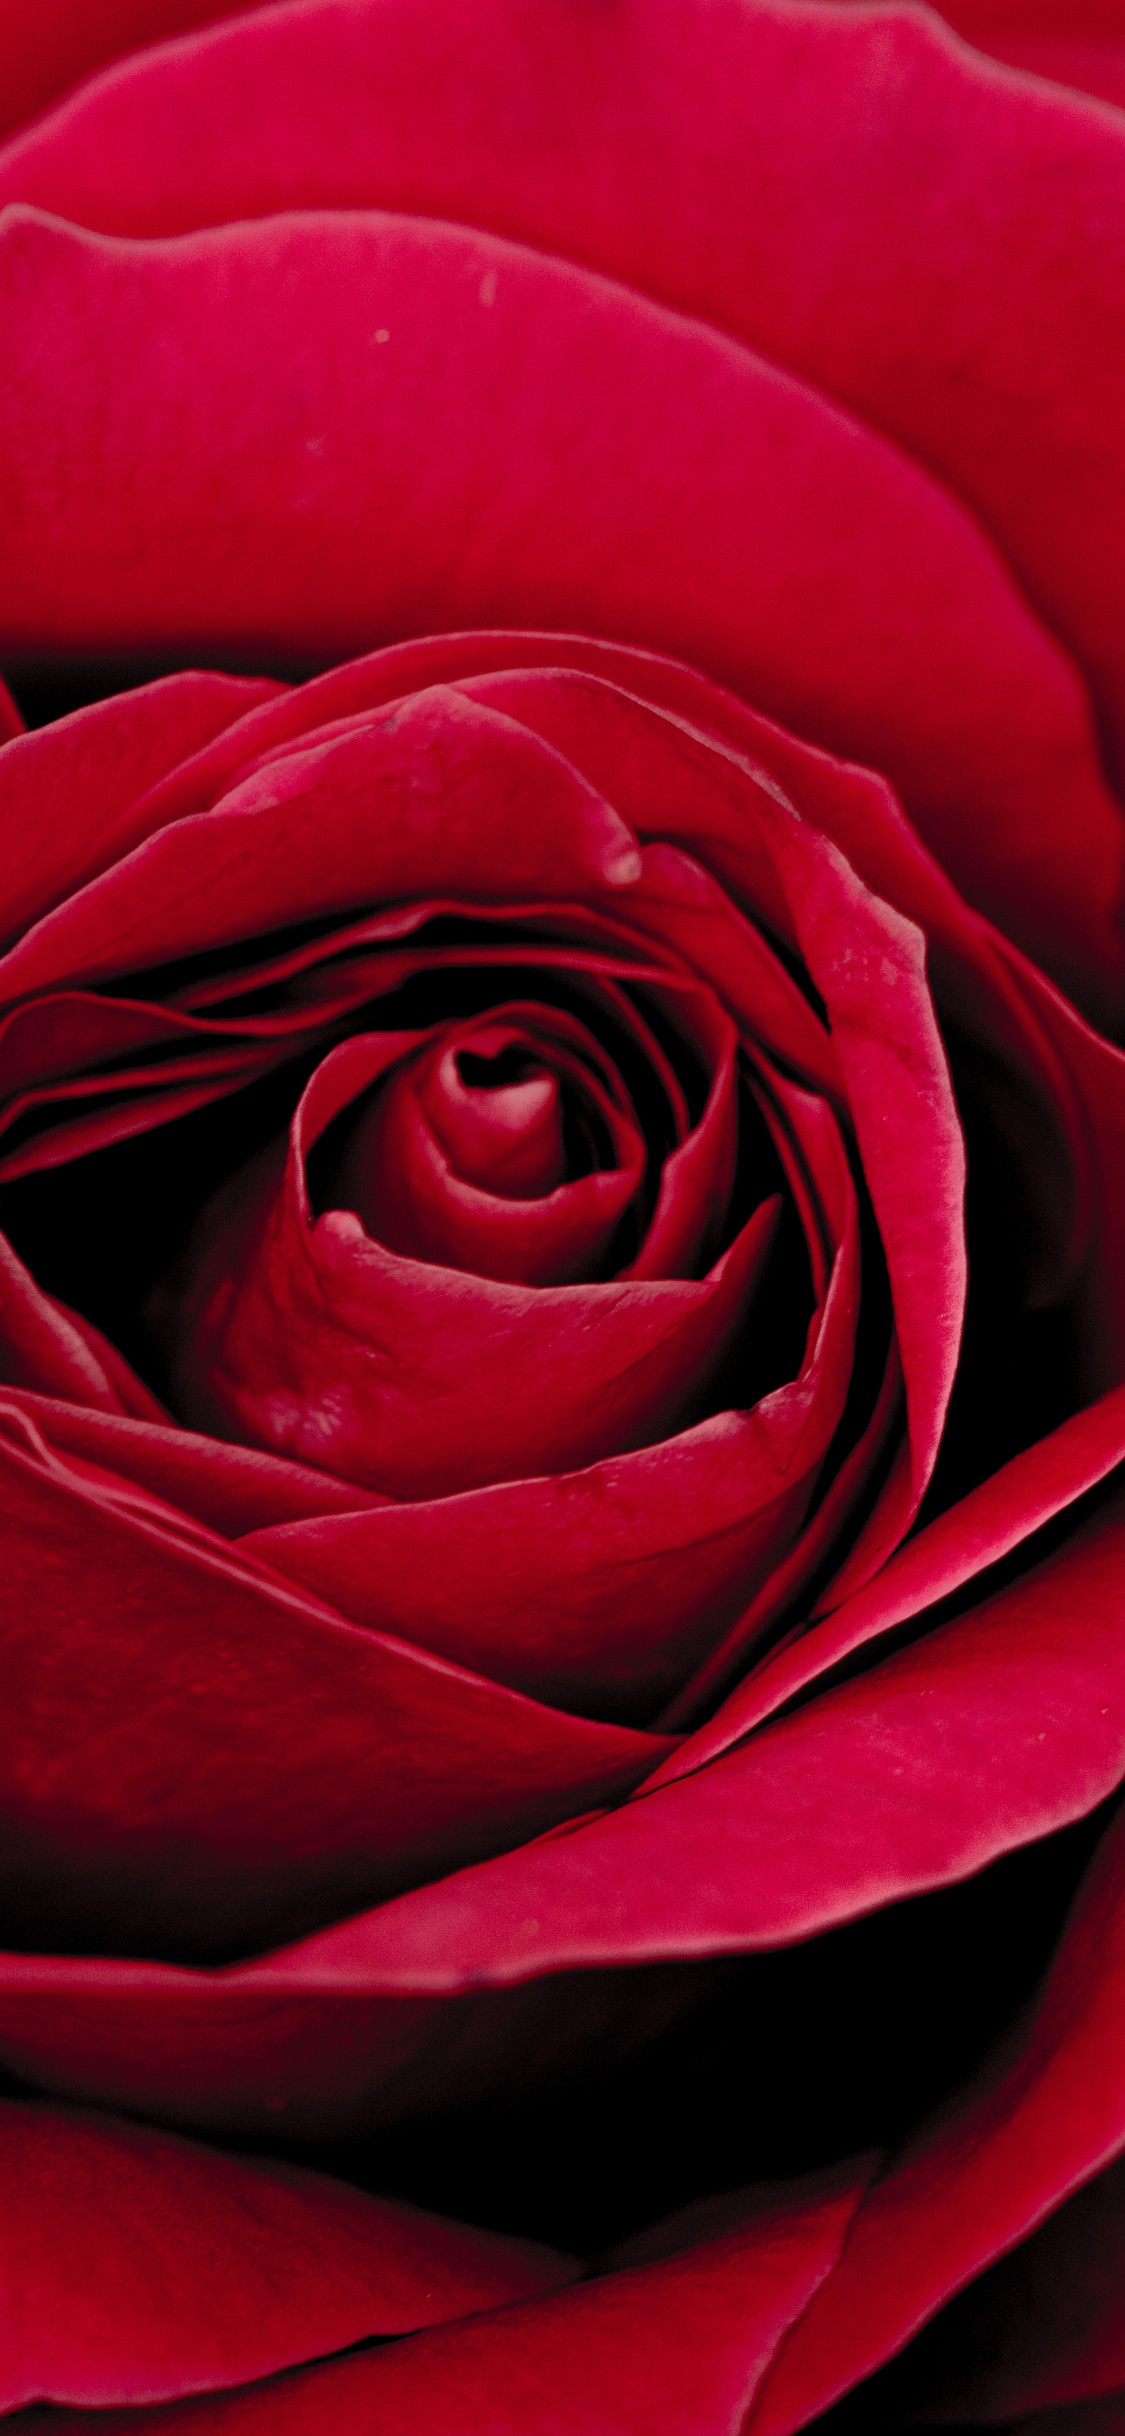 Red Rose in Bloom Close up Photo. Wallpaper in 1125x2436 Resolution